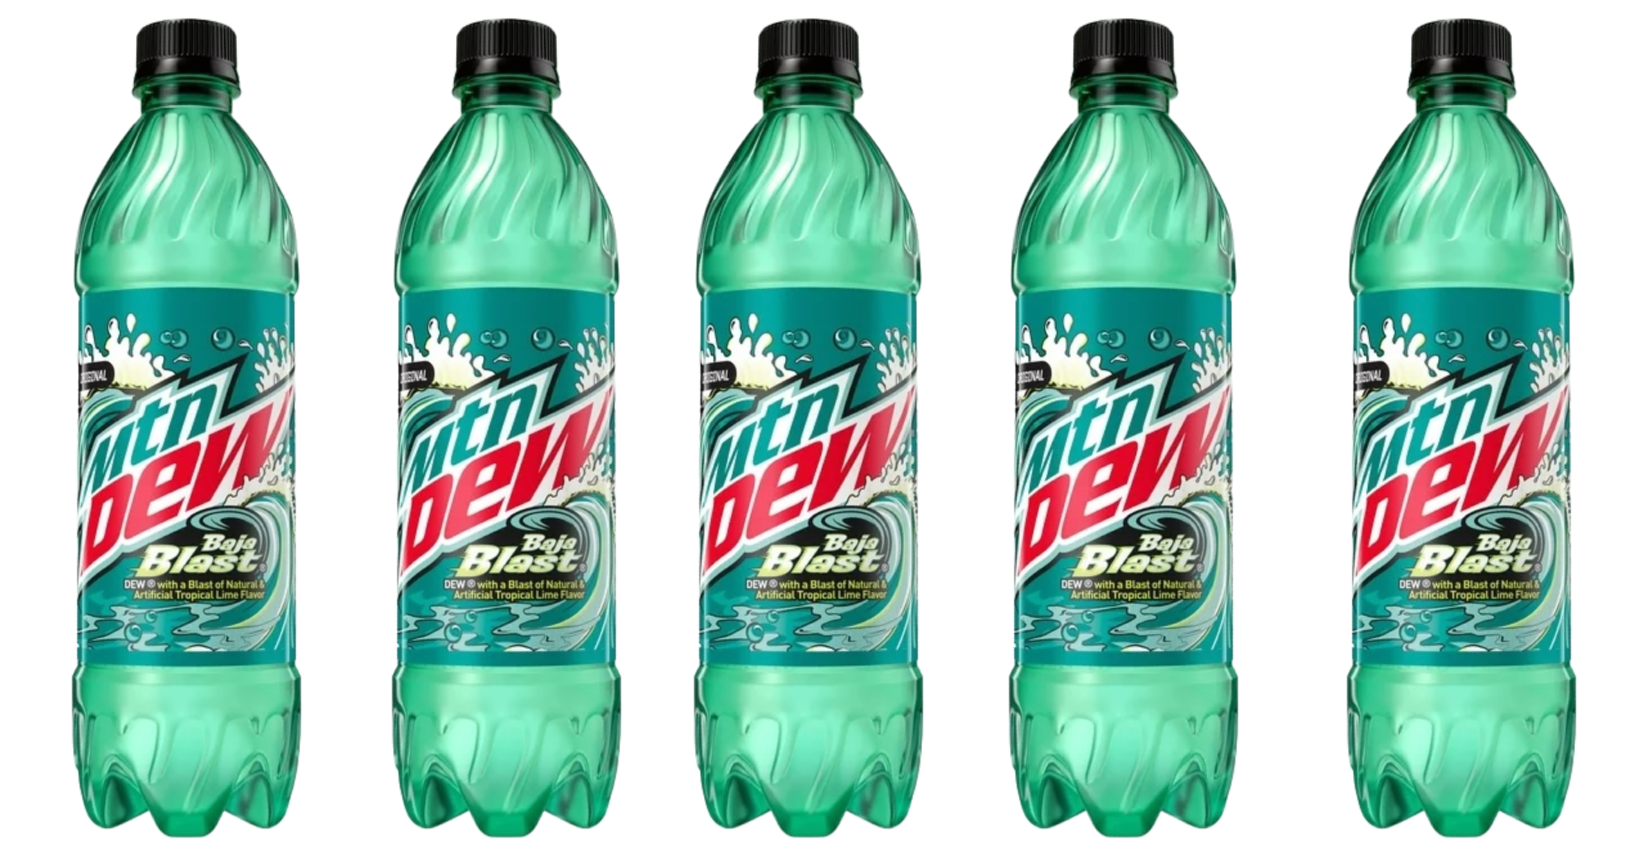 Mountain Dew Is Finally Making Baja Blast a Permanent Addition and It’s About Time